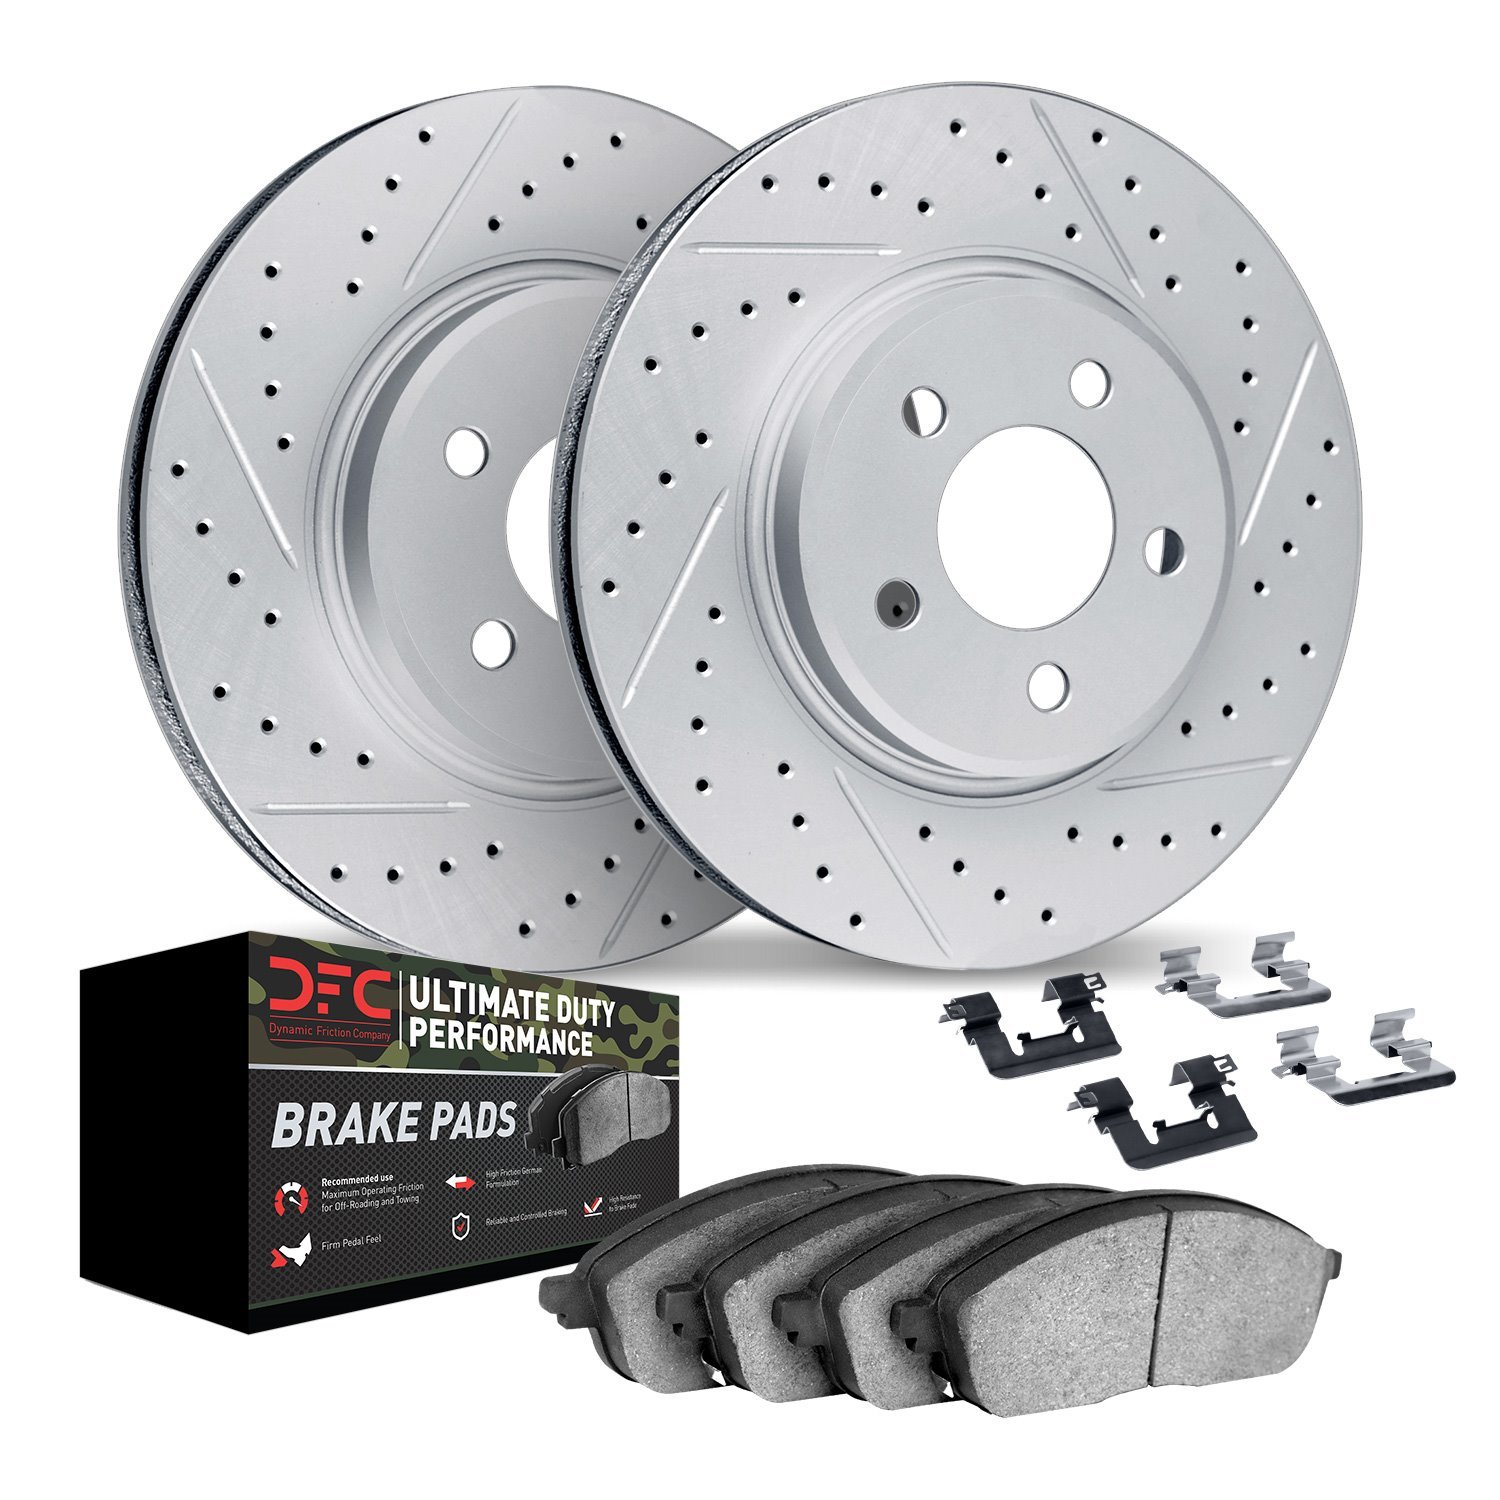 2412-54031 Geoperformance Drilled/Slotted Brake Rotors with Ultimate-Duty Brake Pads Kit & Hardware, 2000-2004 Ford/Lincoln/Merc